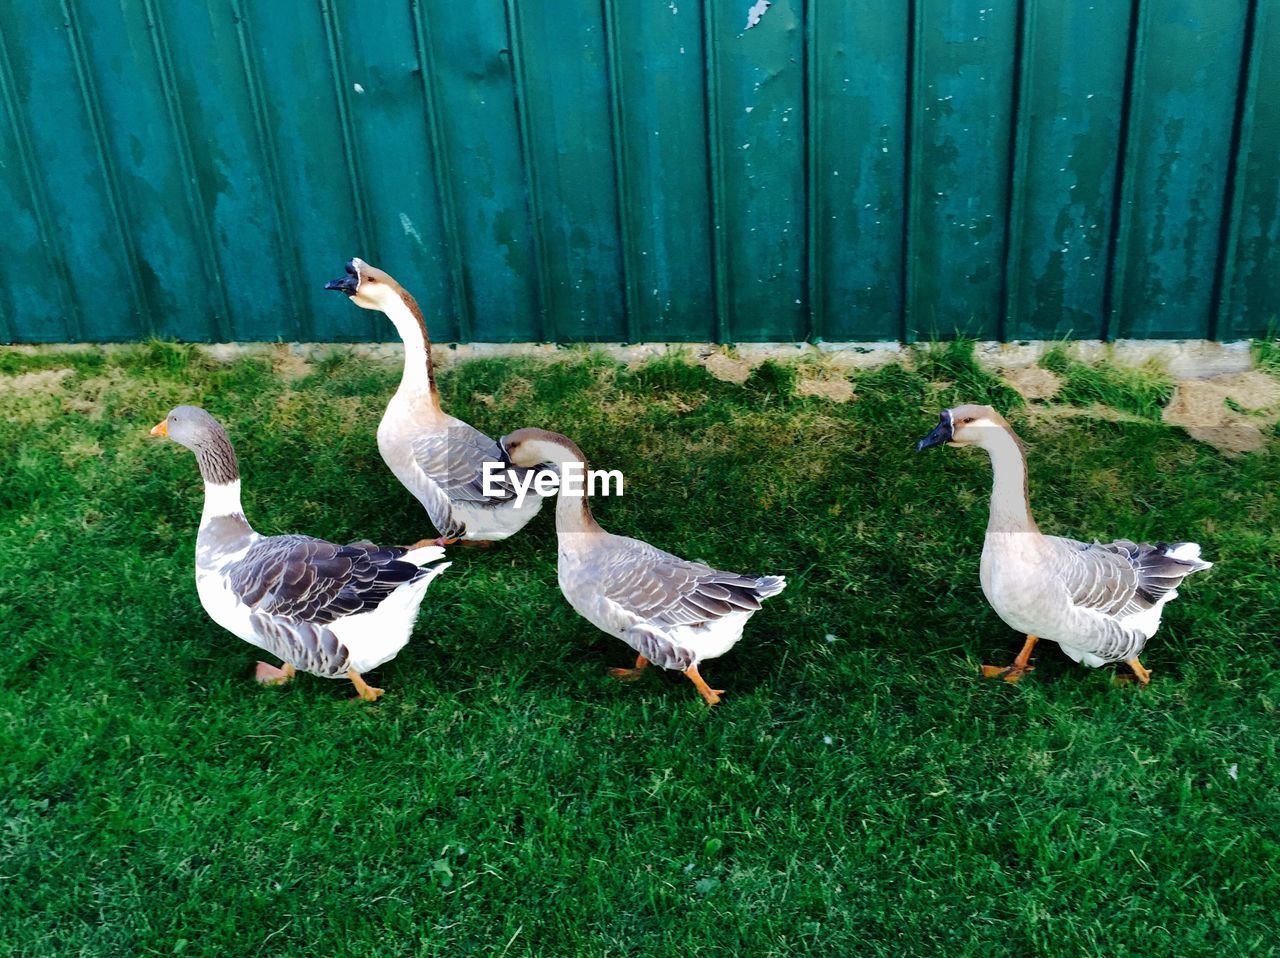 Geese on grassy field